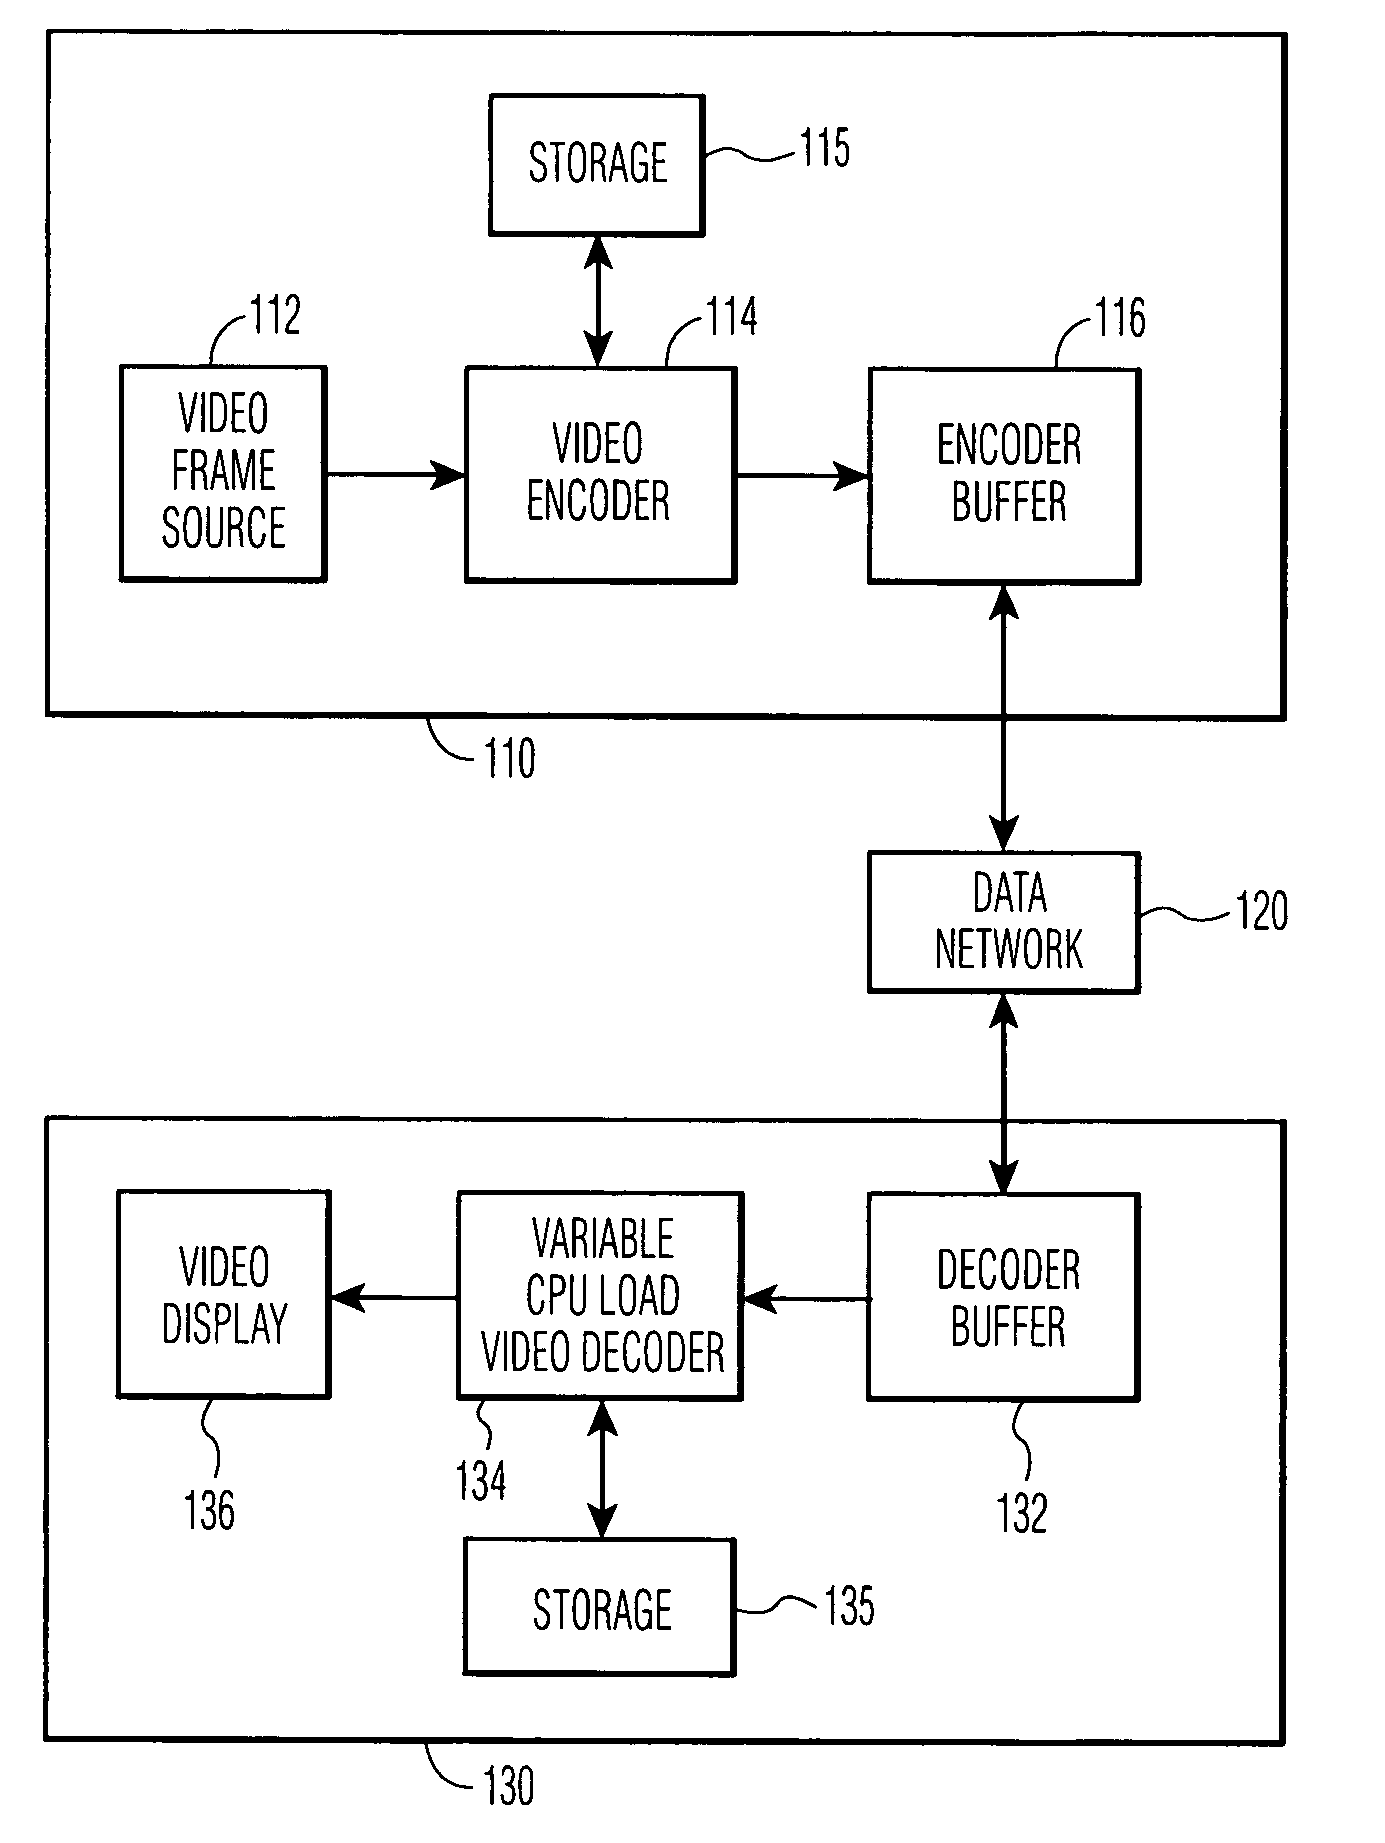 System and method for dynamic adaptive decoding of scalable video to balance CPU load